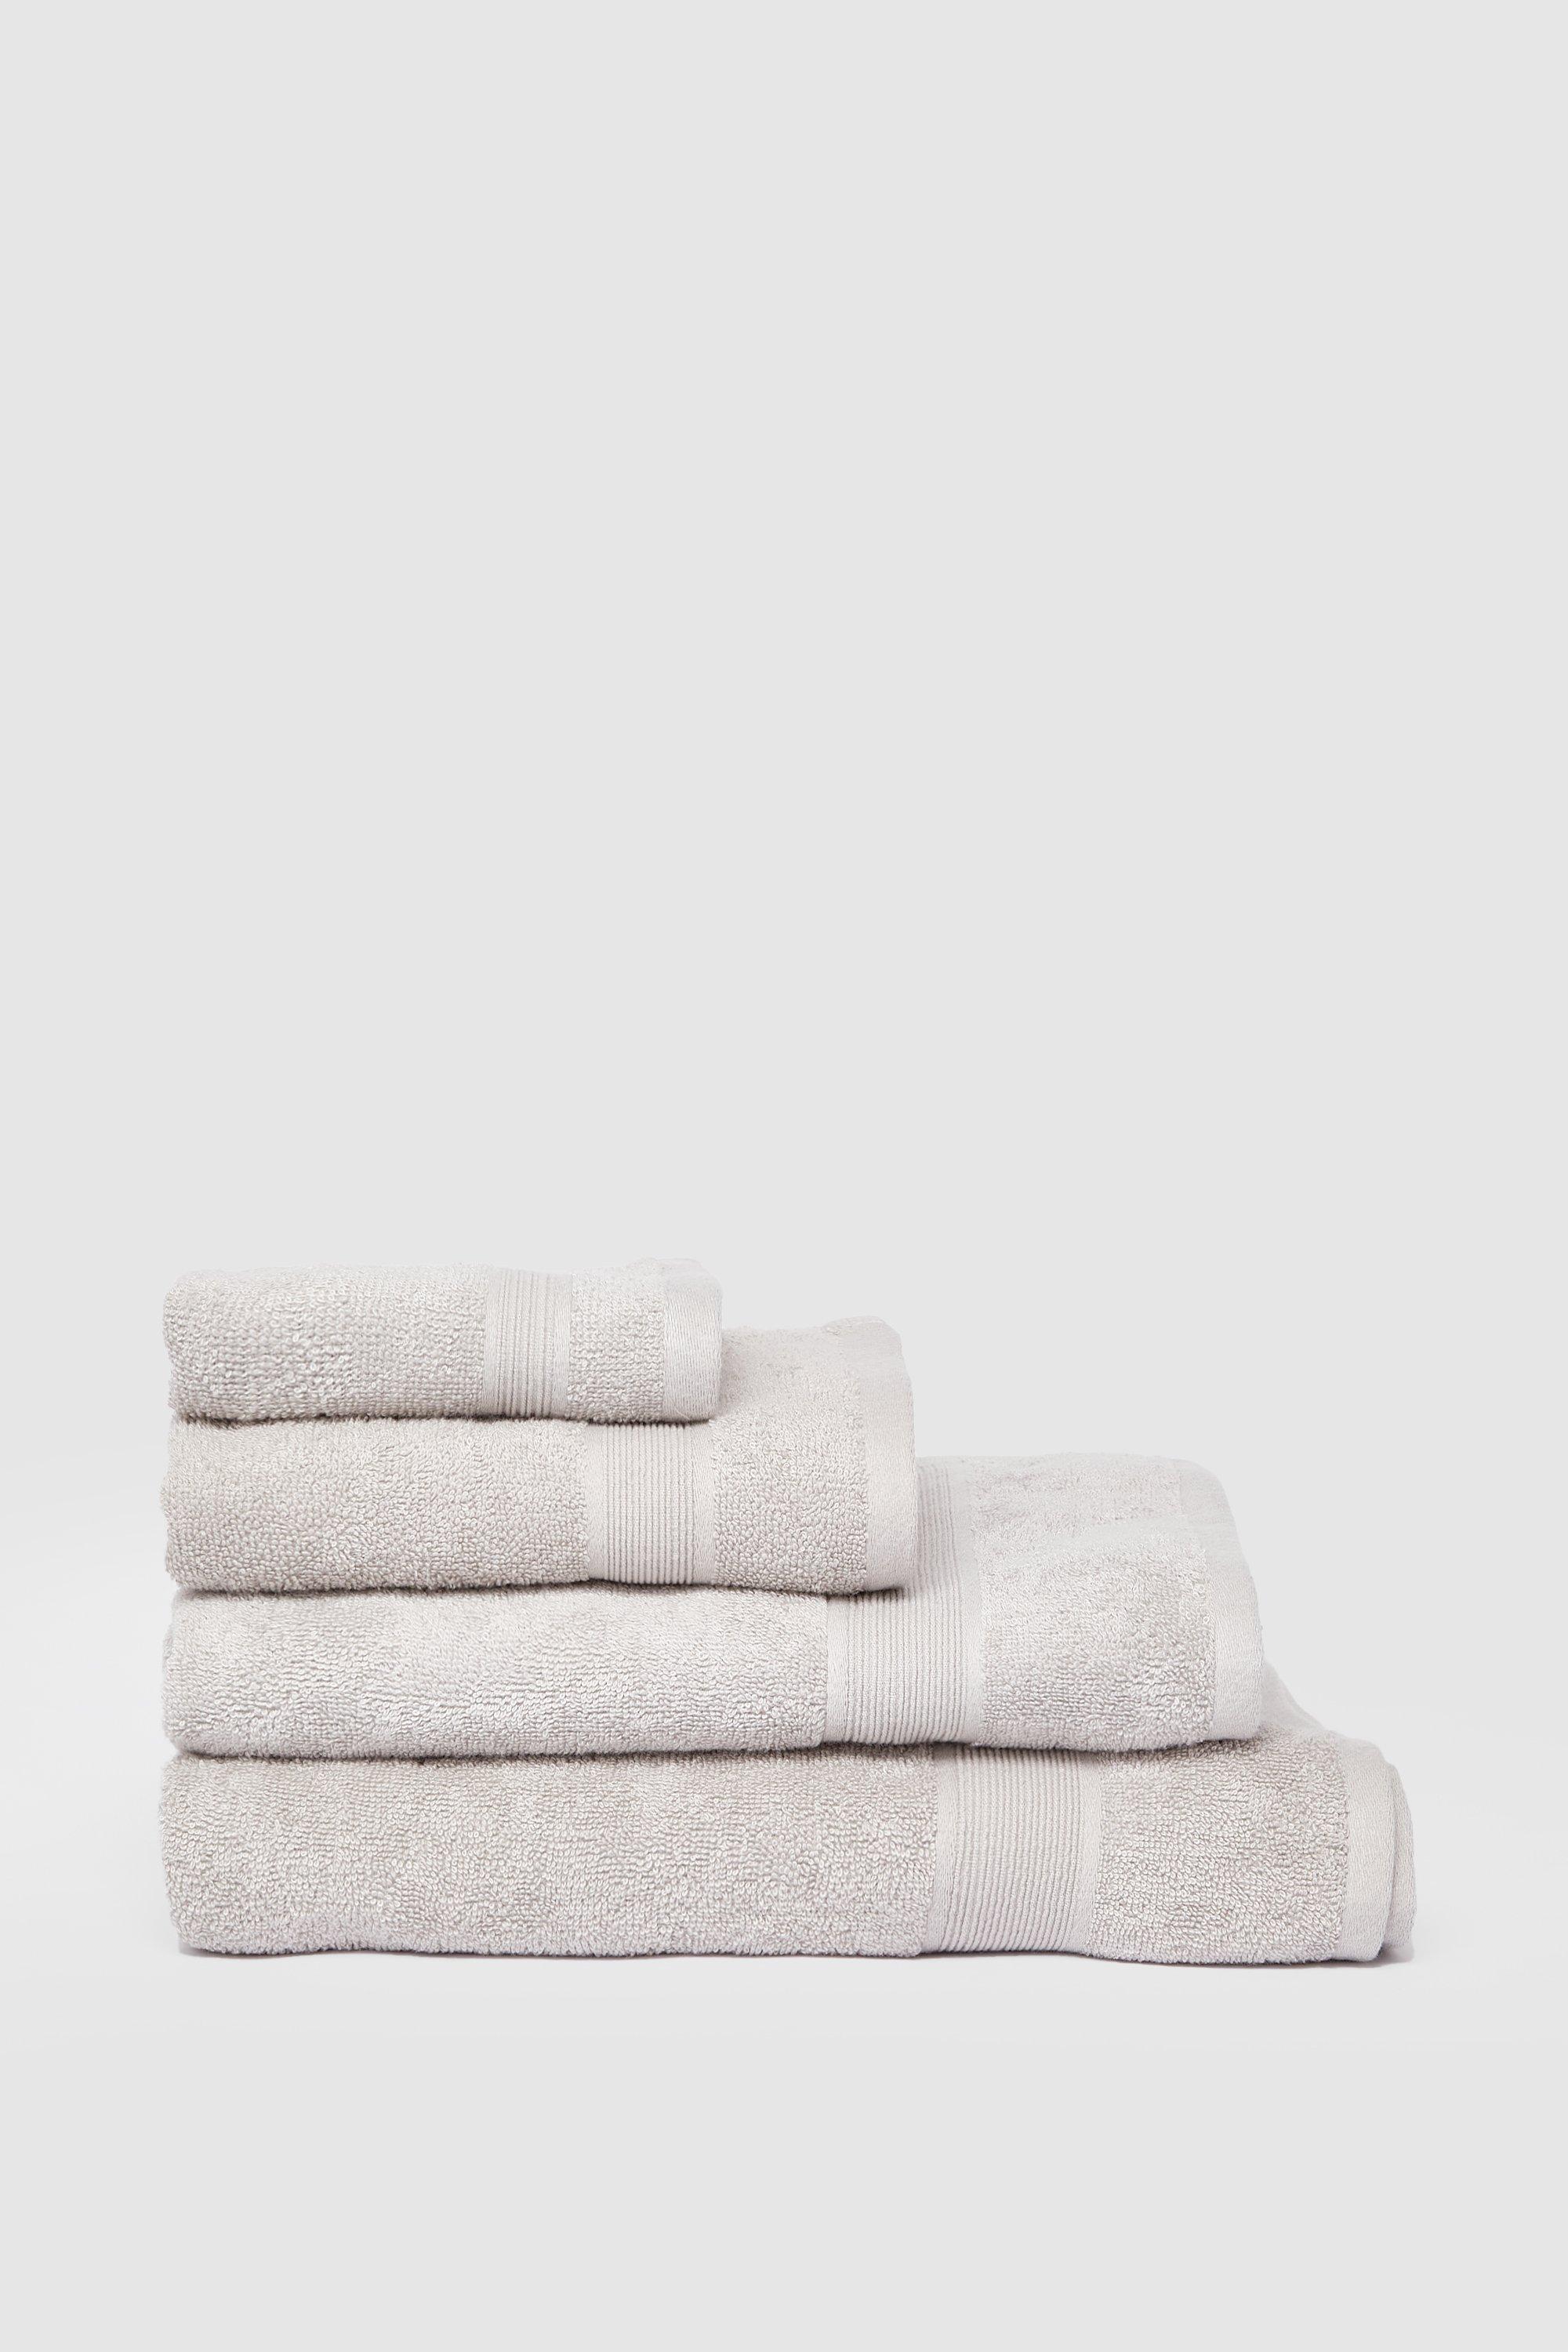 Picture of Bamboo Bath Sheet Towel